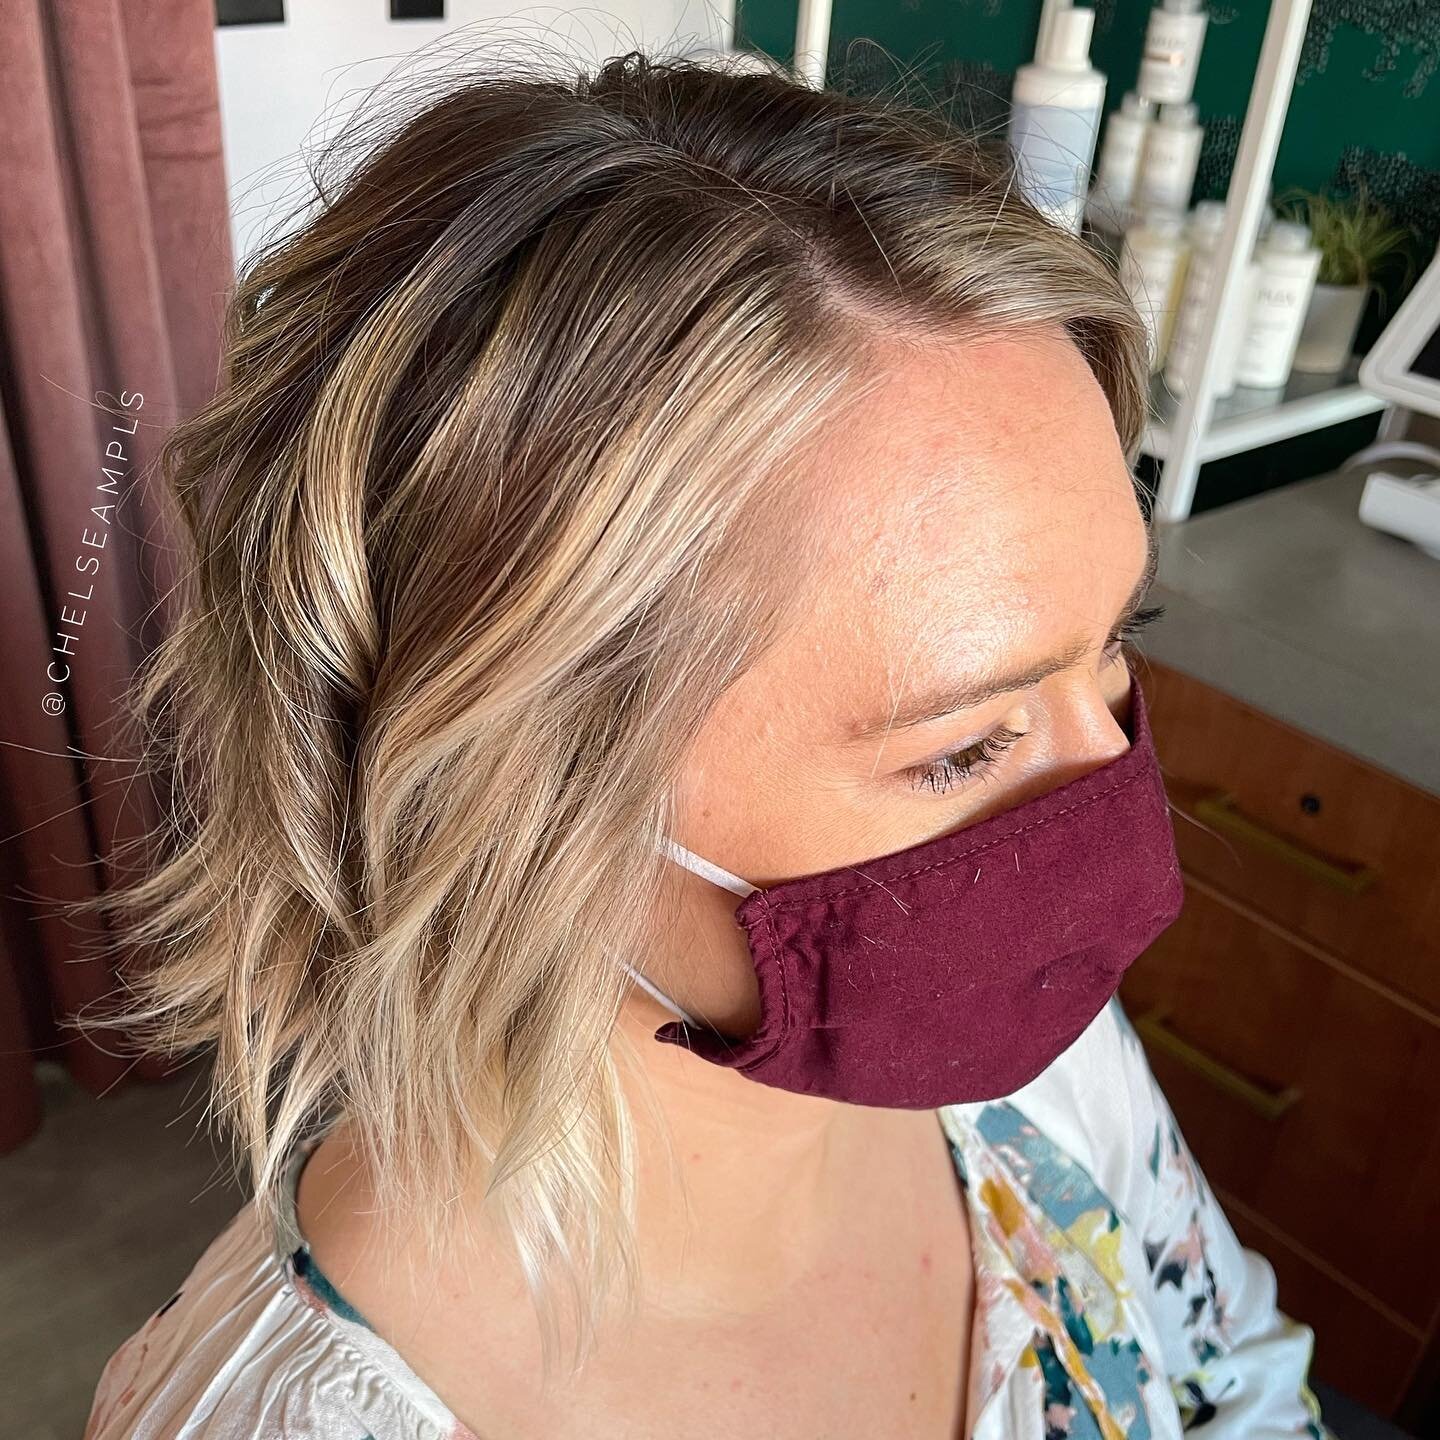 #foilyage and more layers for spring 🌷
.
.
.
.
.
.
#olaplex #balayage #foils #highlights #hairbychelsea #chelseampls #minneapolishair #minneapolisartist #mplshair #mplshairstylist #mn #minnesotahairstylist